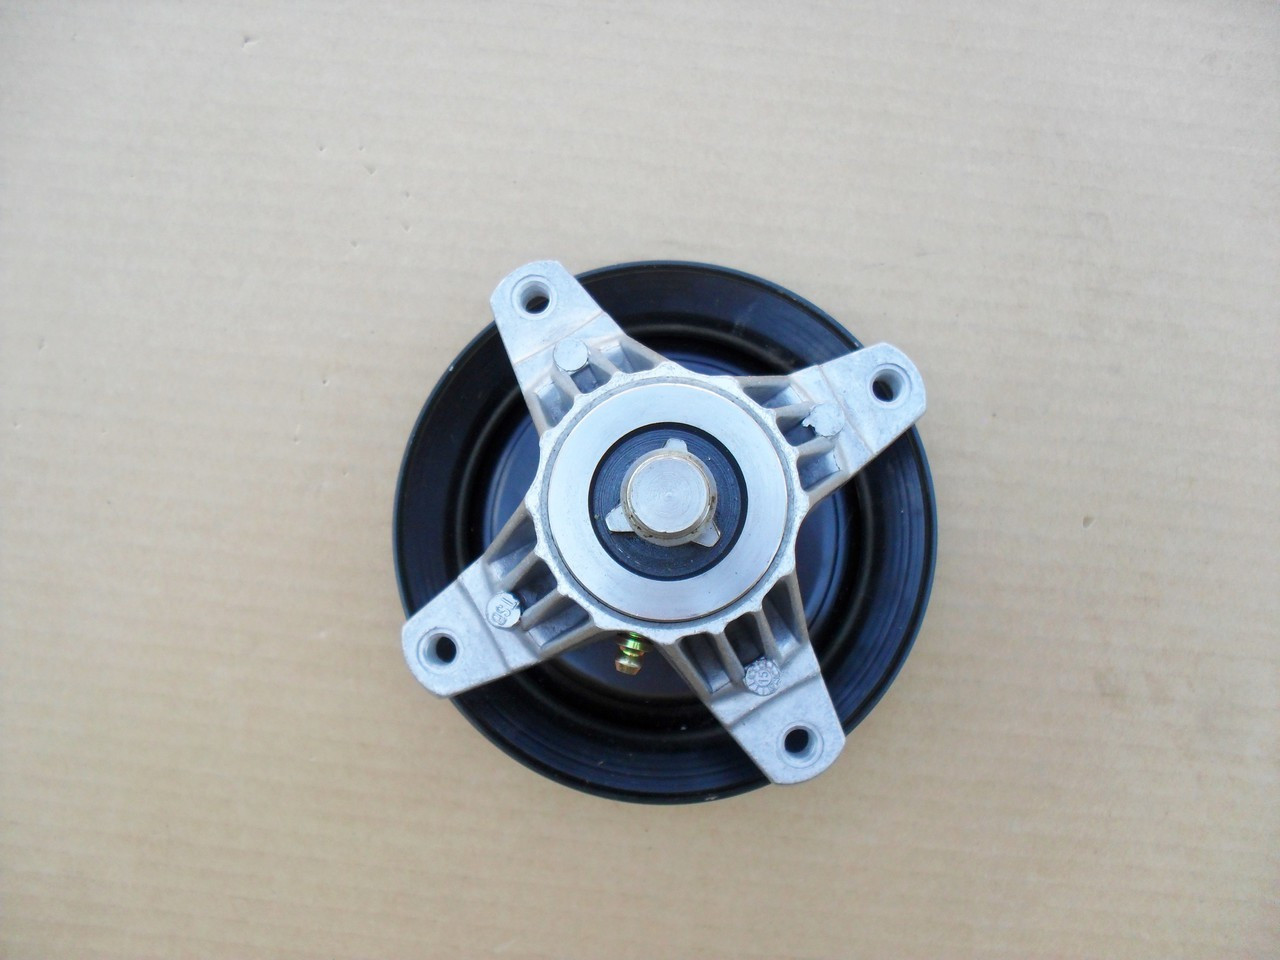 Deck Spindle for Massey Ferguson 618-04822, 618-04822A, 618-04889, 618-04889A, 618-04950